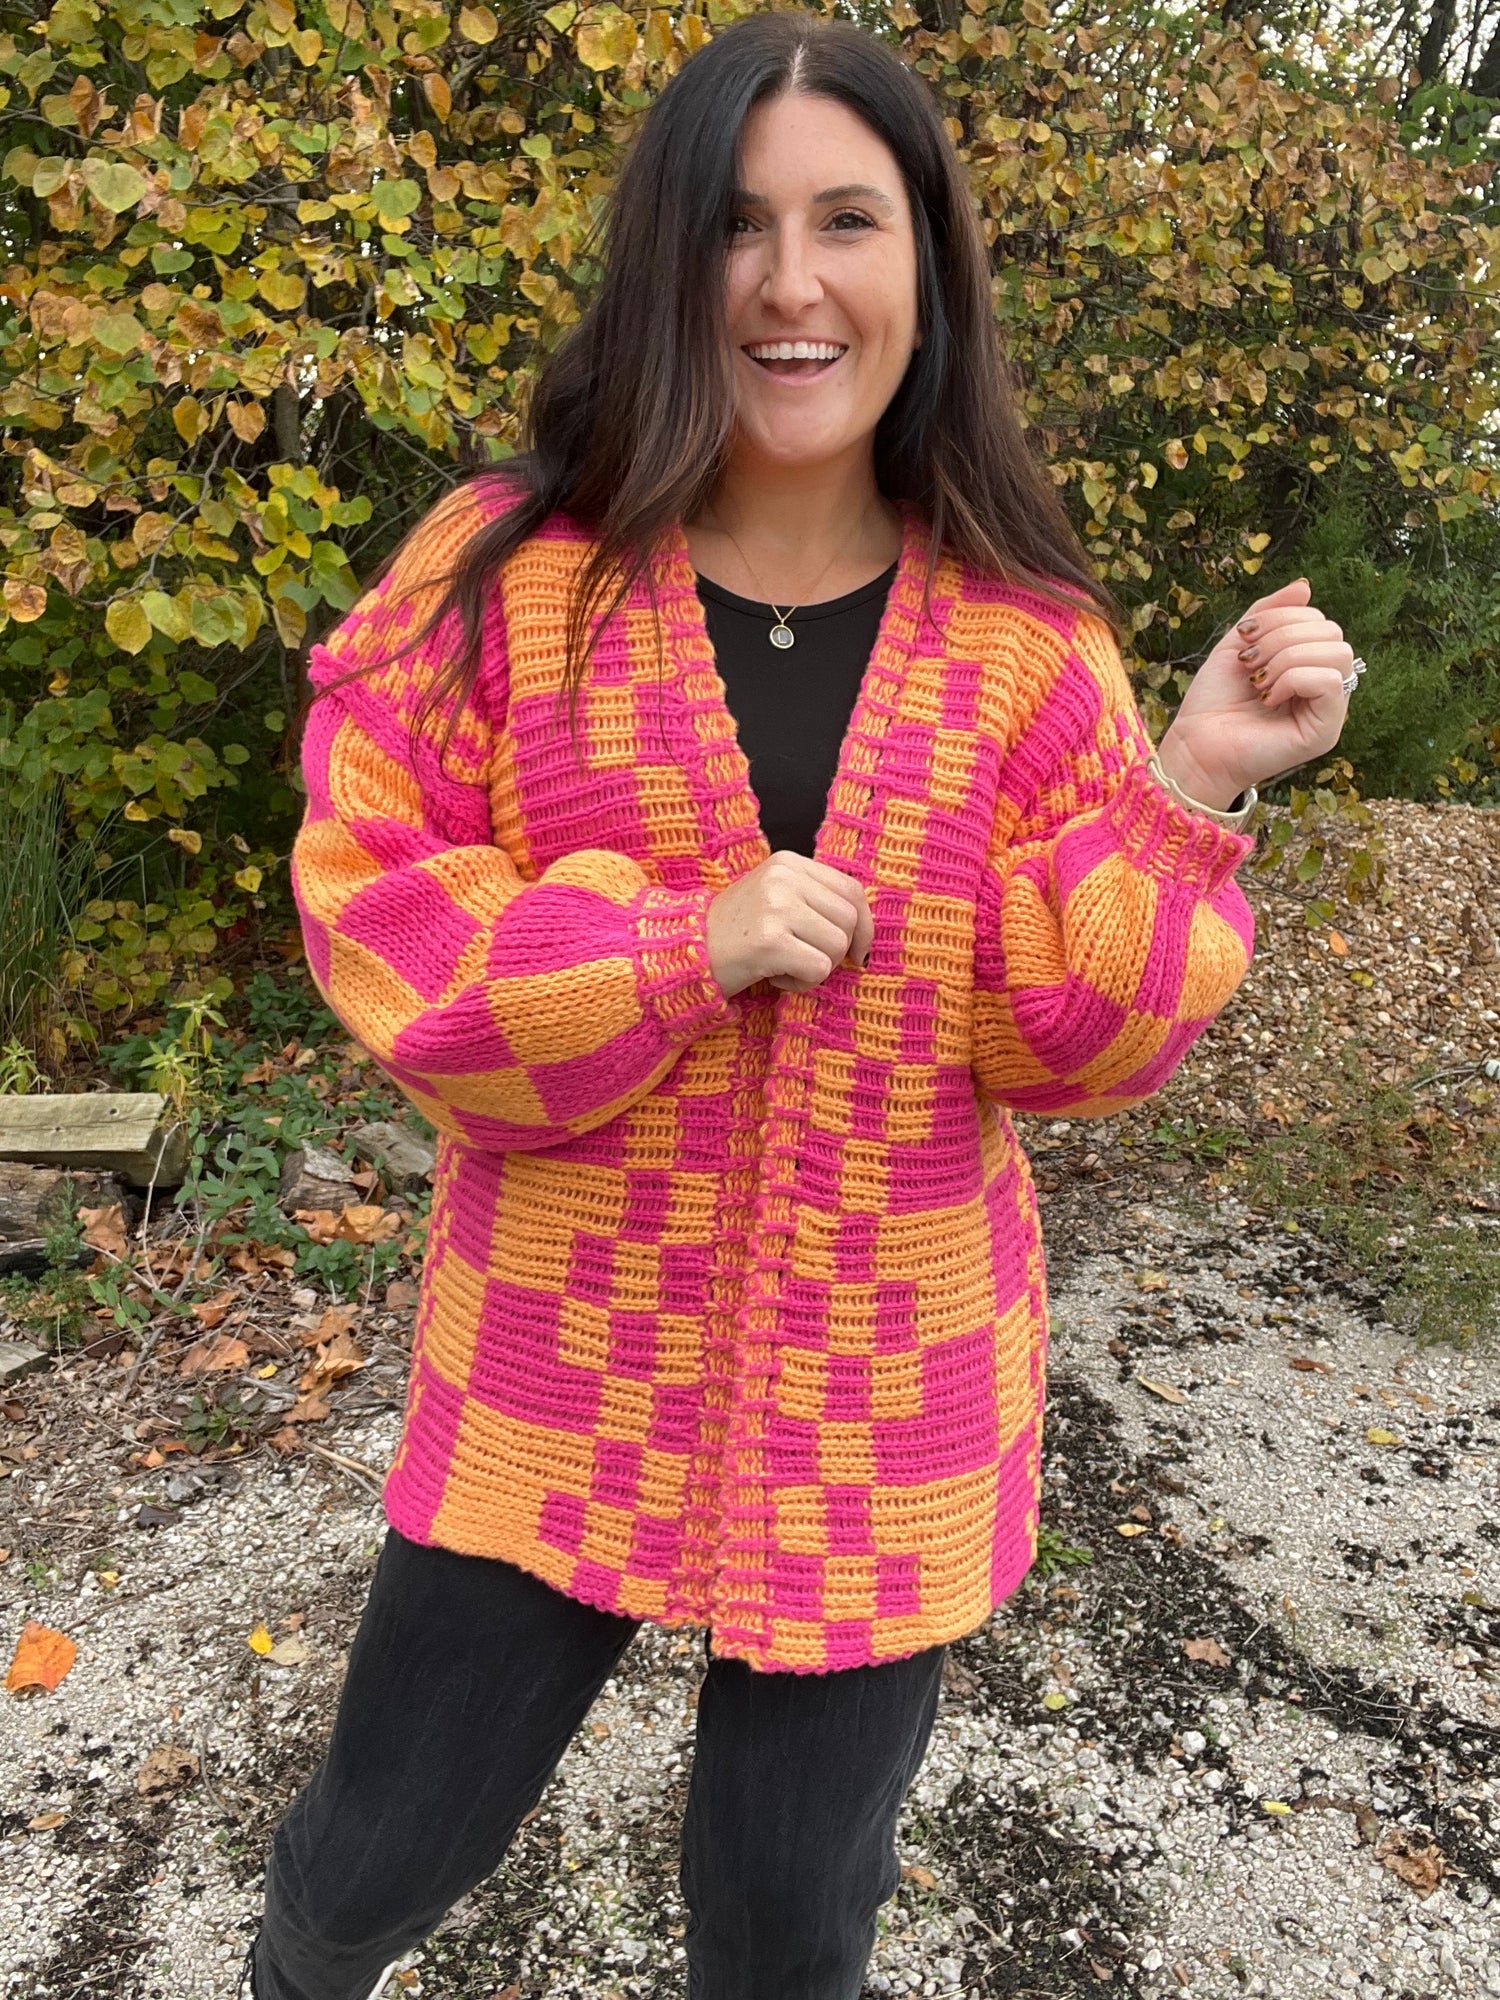 CHECKERED BROWN CARDIGAN – Crave Boutique